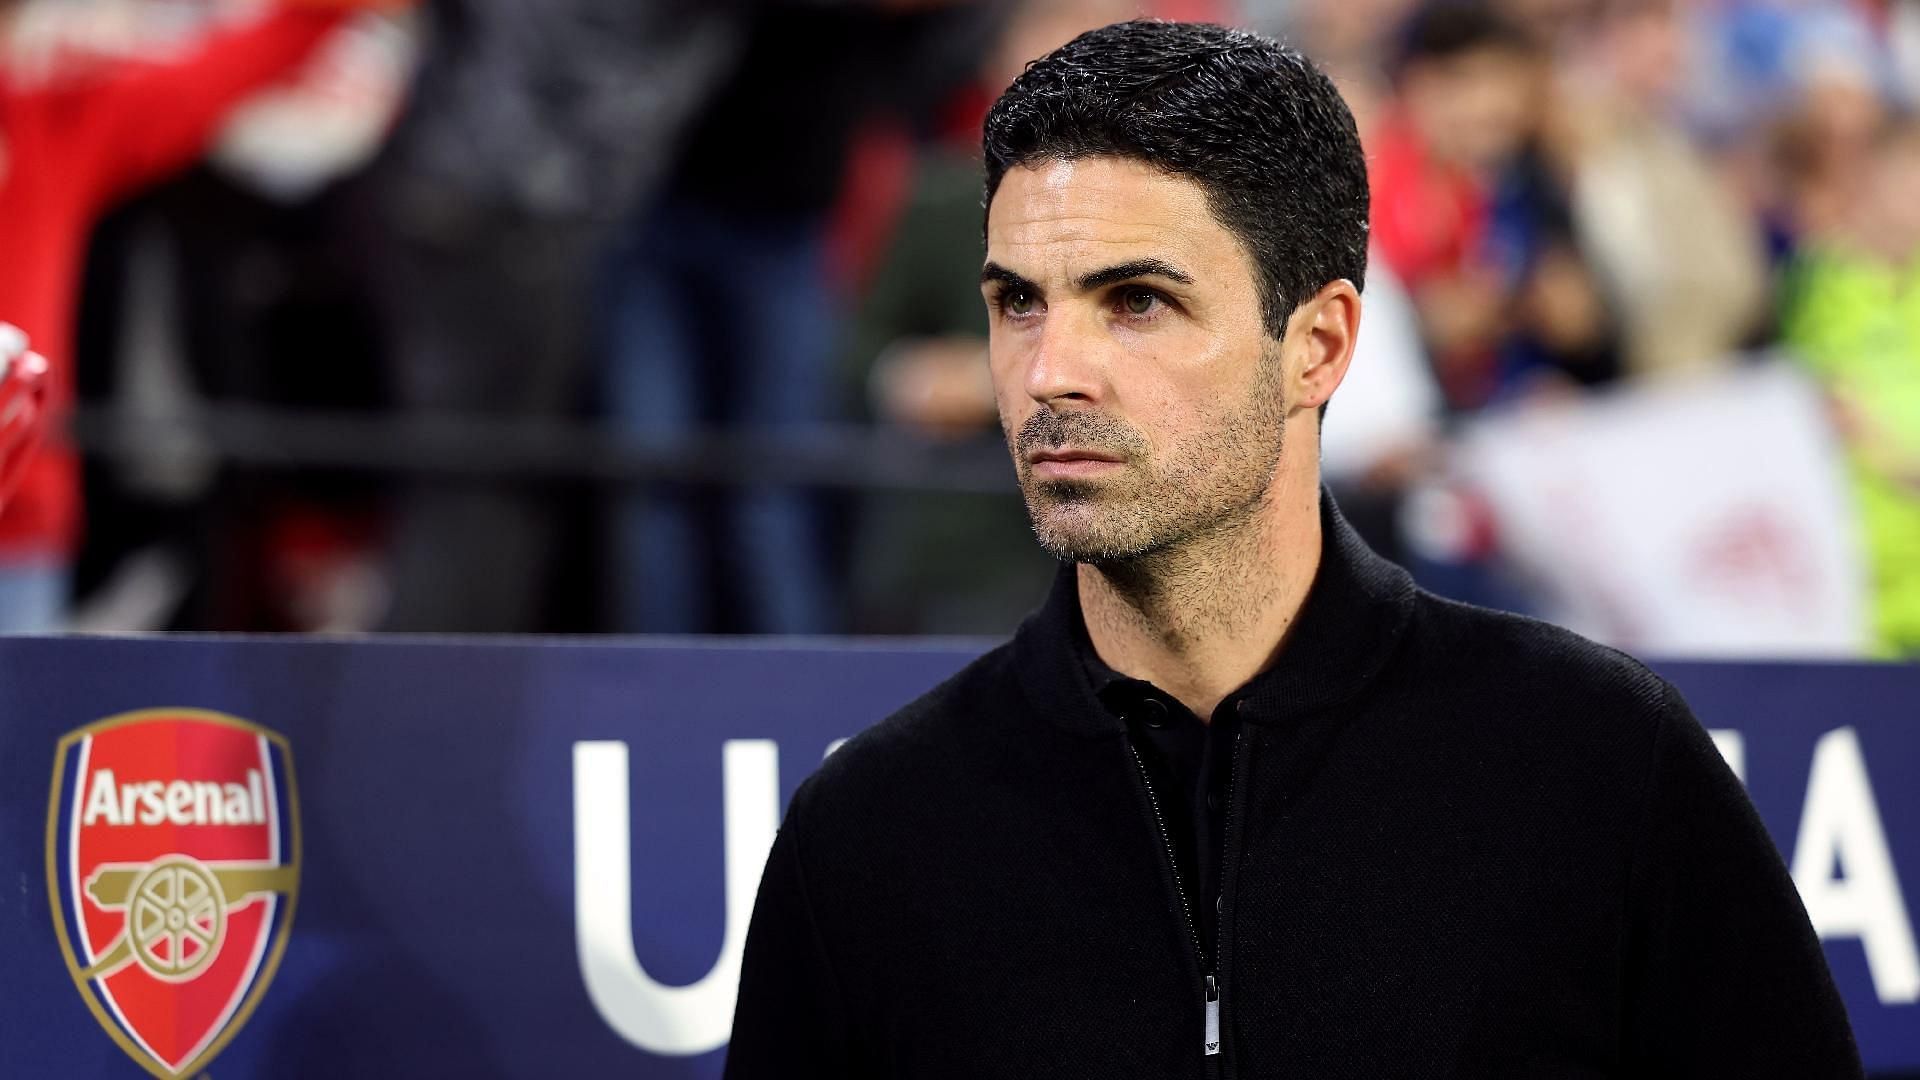 Mikel Arteta has given new life to Arsenal ever since he took over the club in 2019.